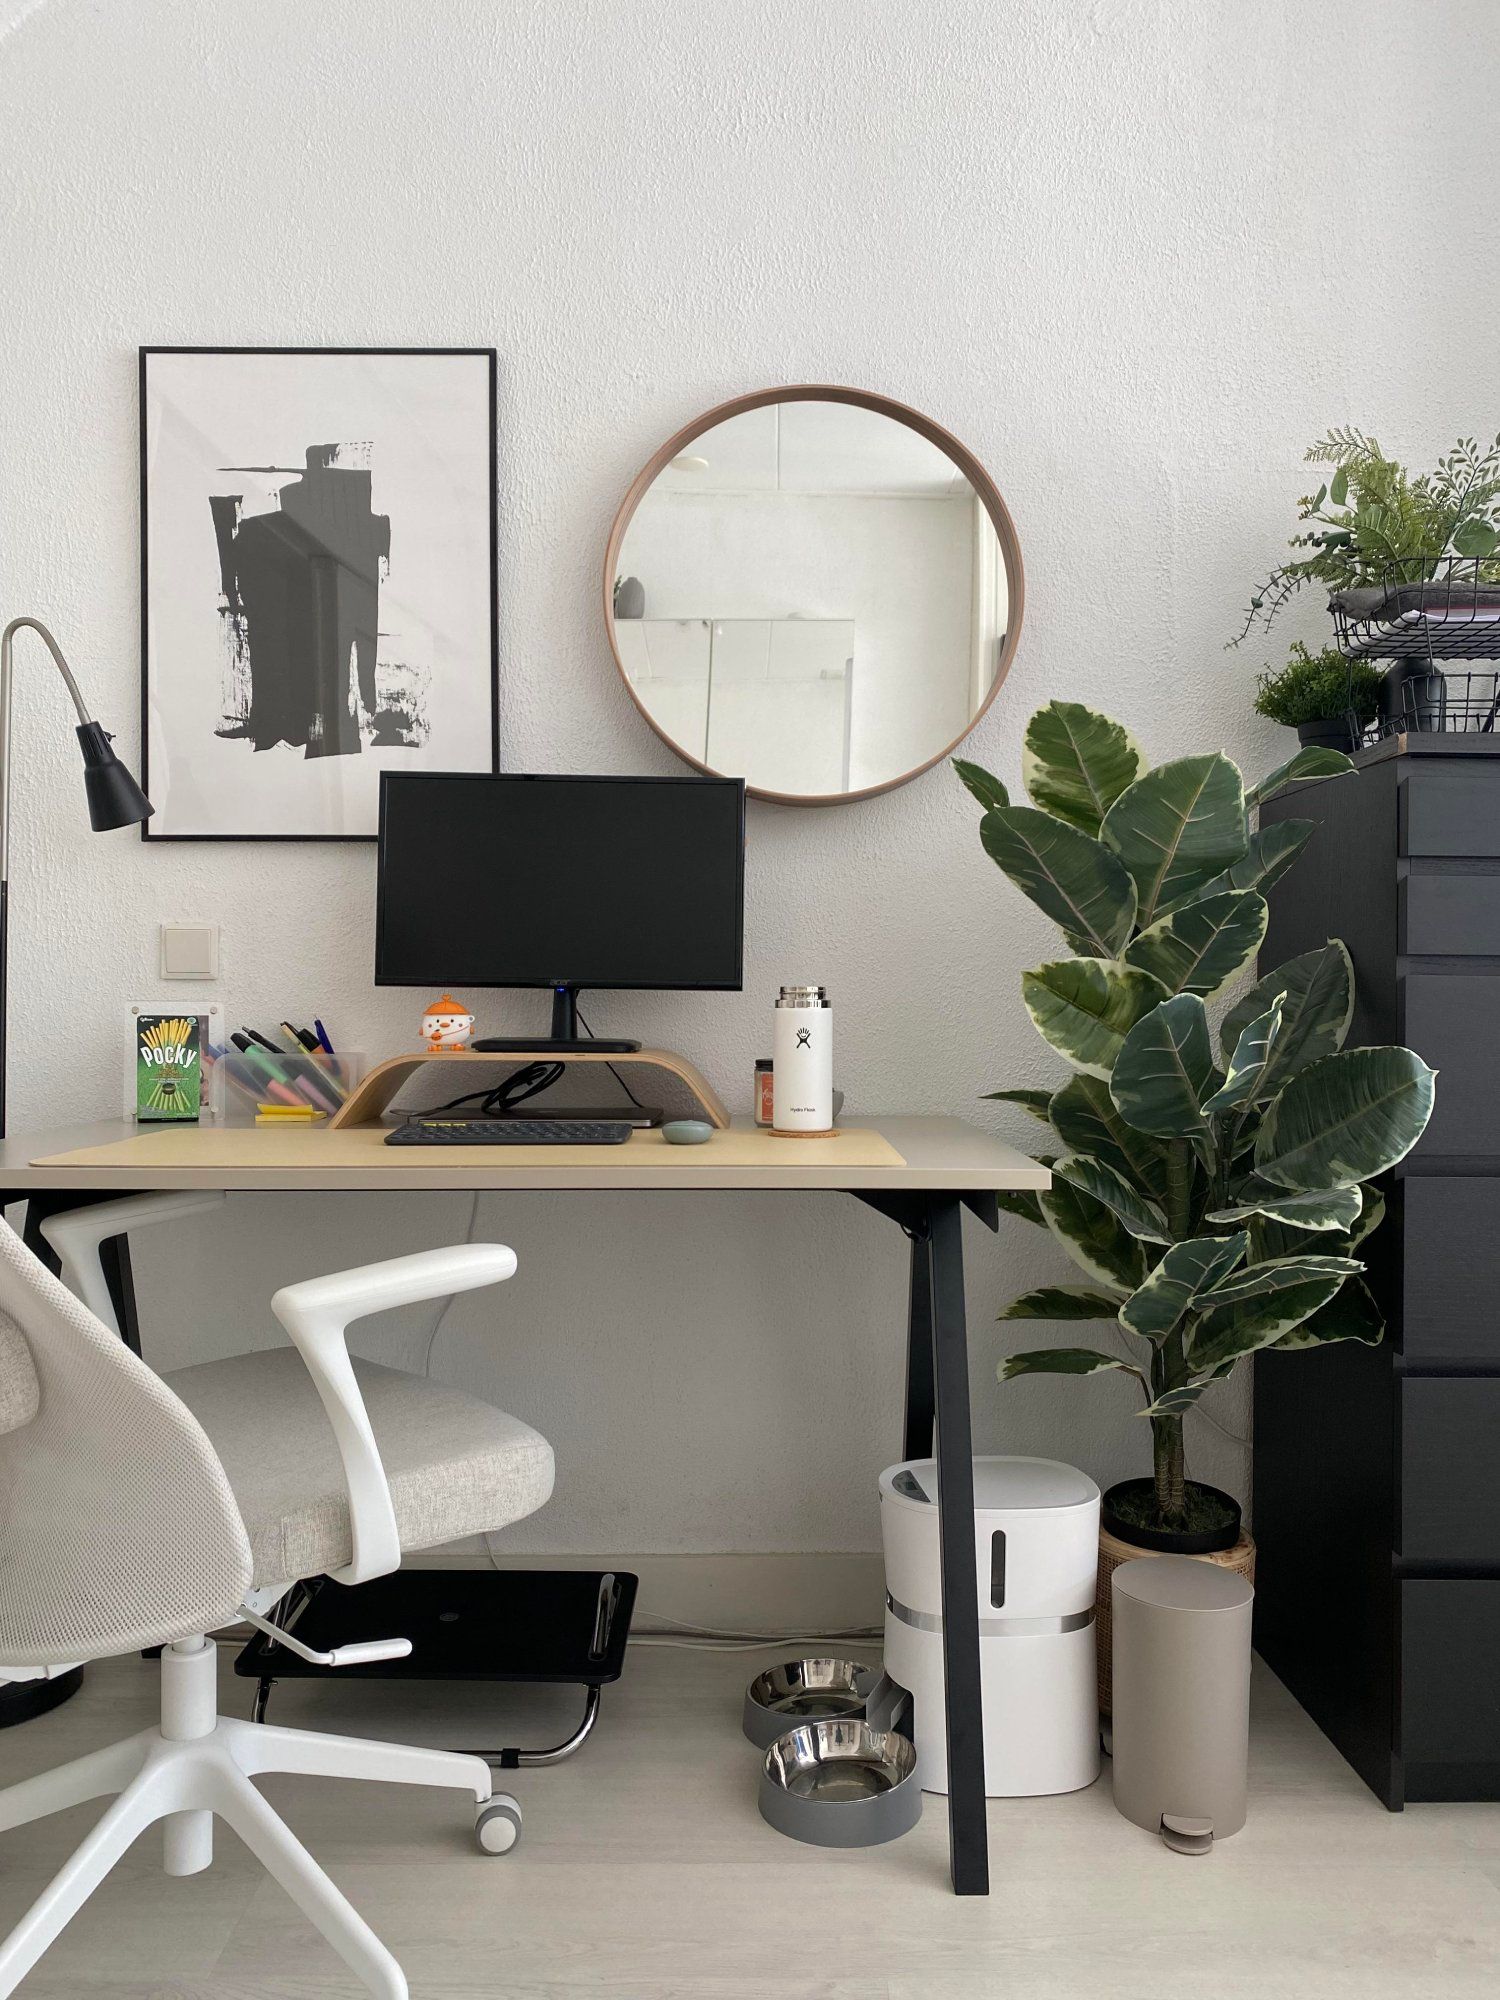 Absolute Office (Pty) Ltd - 21 Work From Home Office Essentials for the  Perfect Home Setup (2020)  essentials/?utm_medium=social&utm_source=pinterest&utm_campaign=tailwind_tribes&utm_content